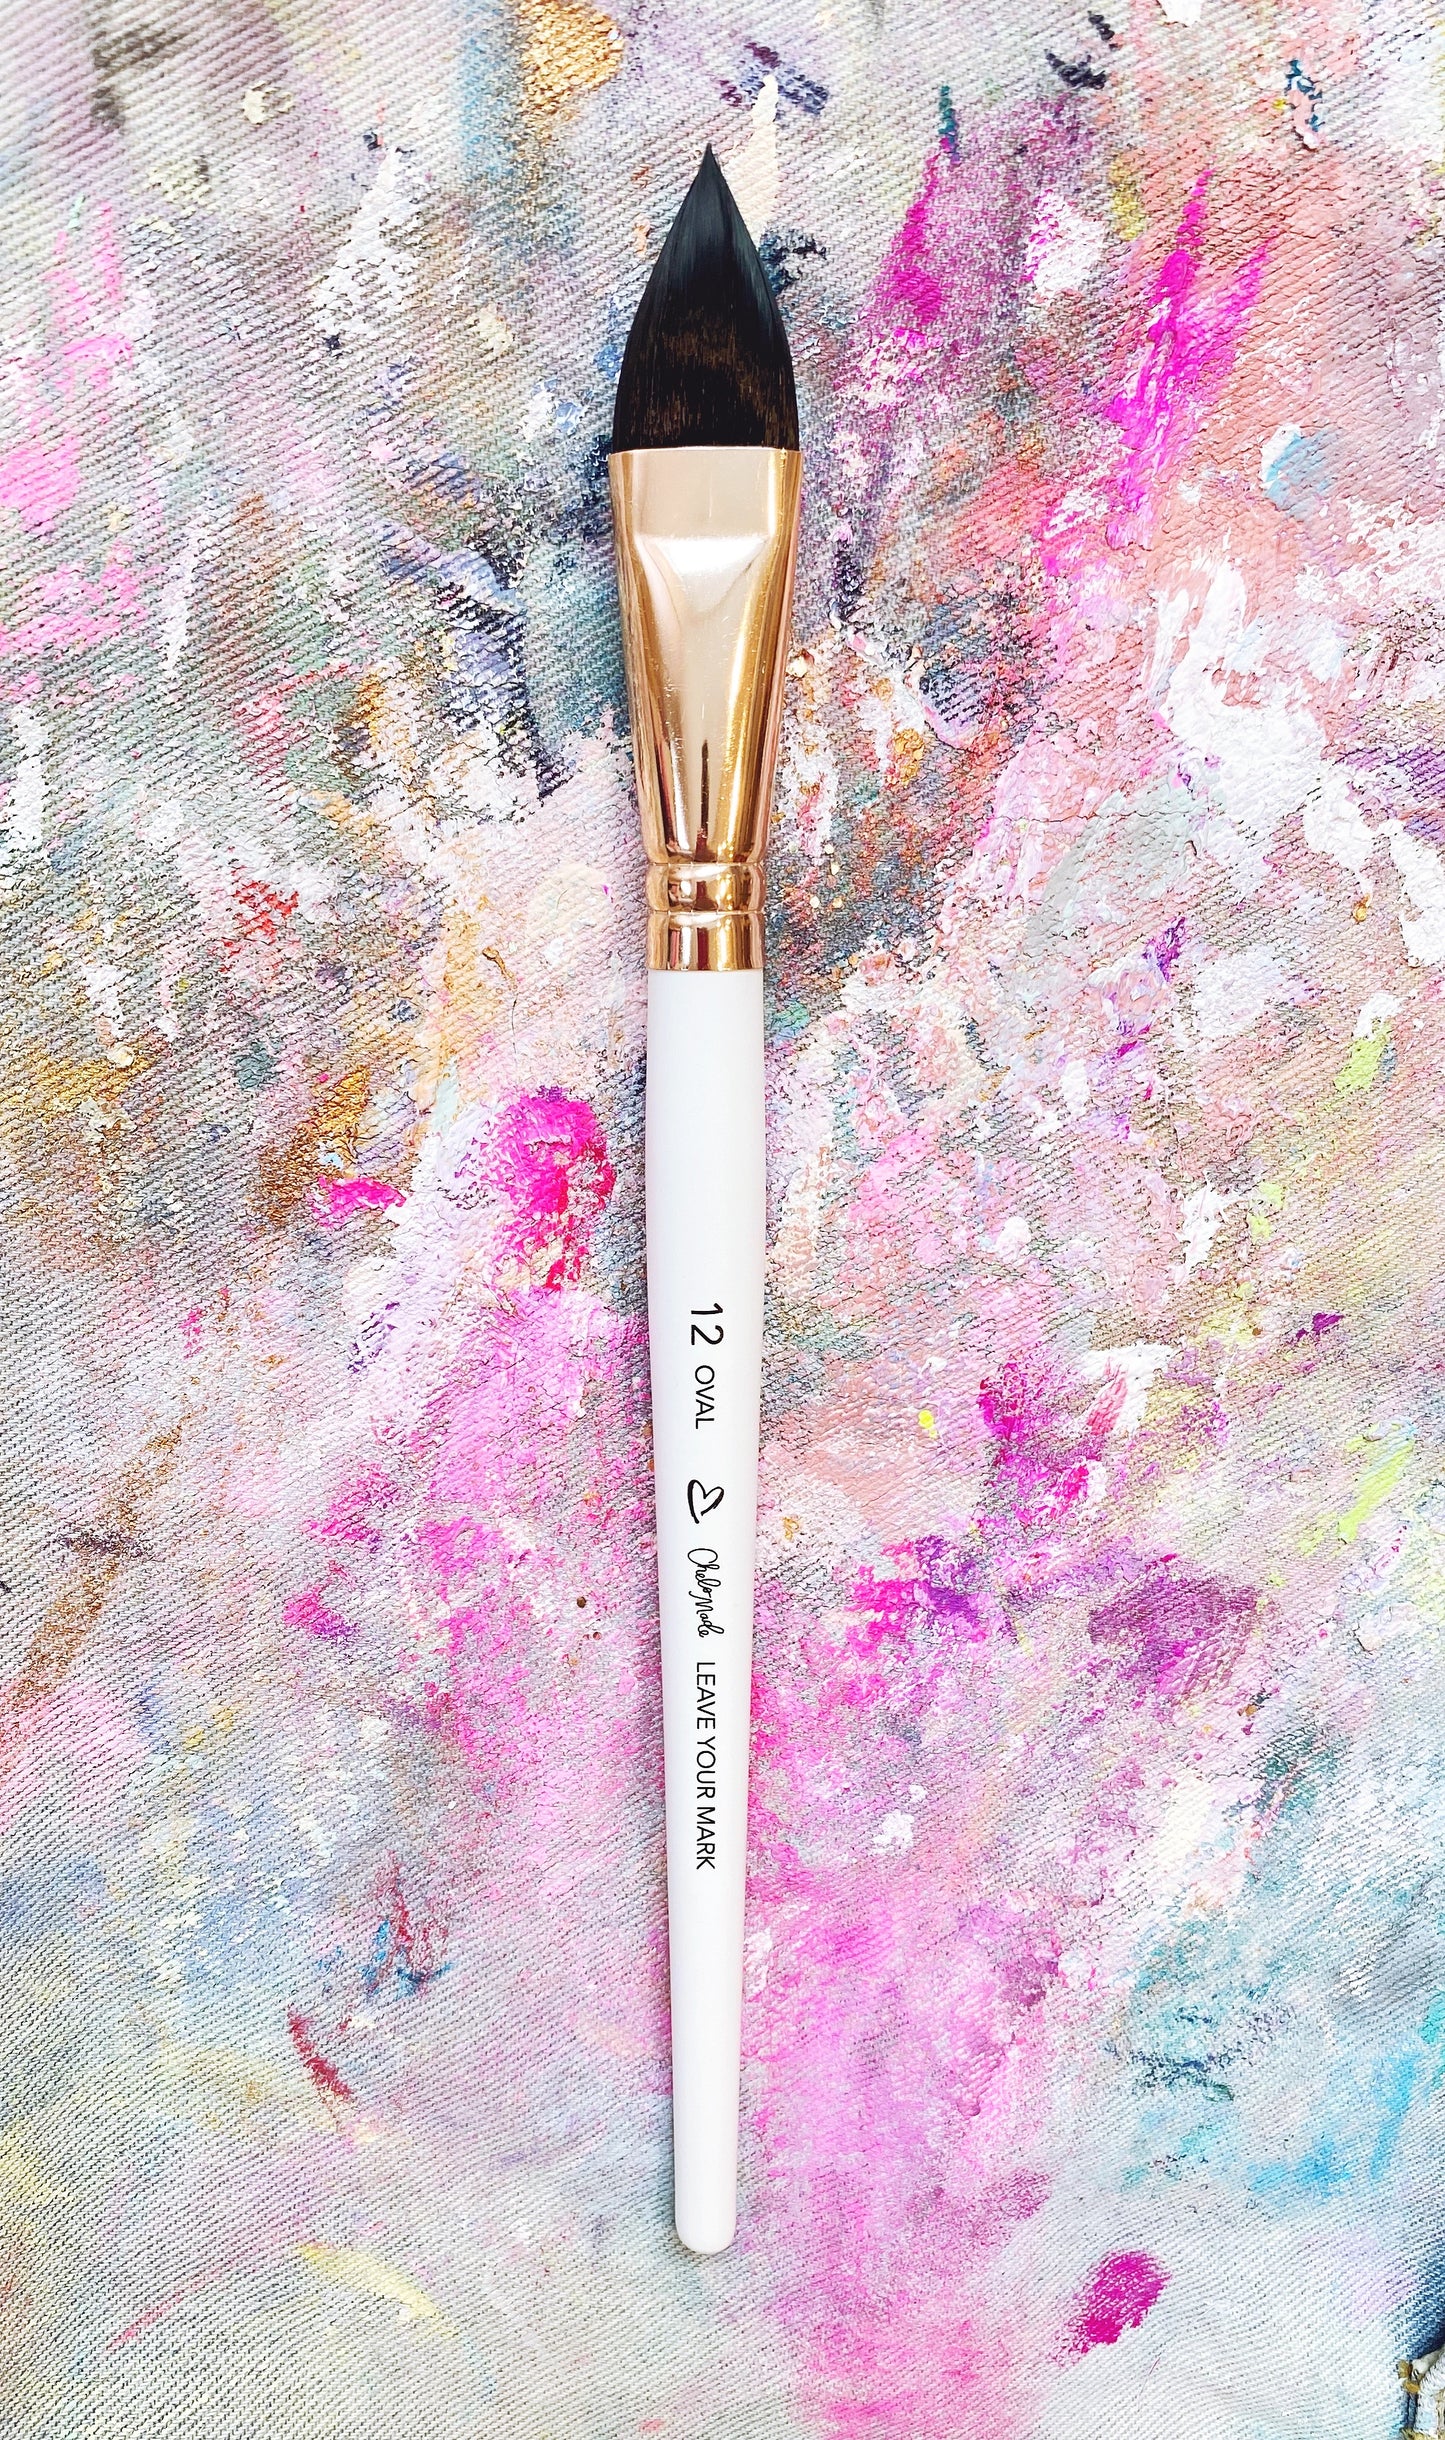 Leave Your Mark + The Luckiest Brush Sets